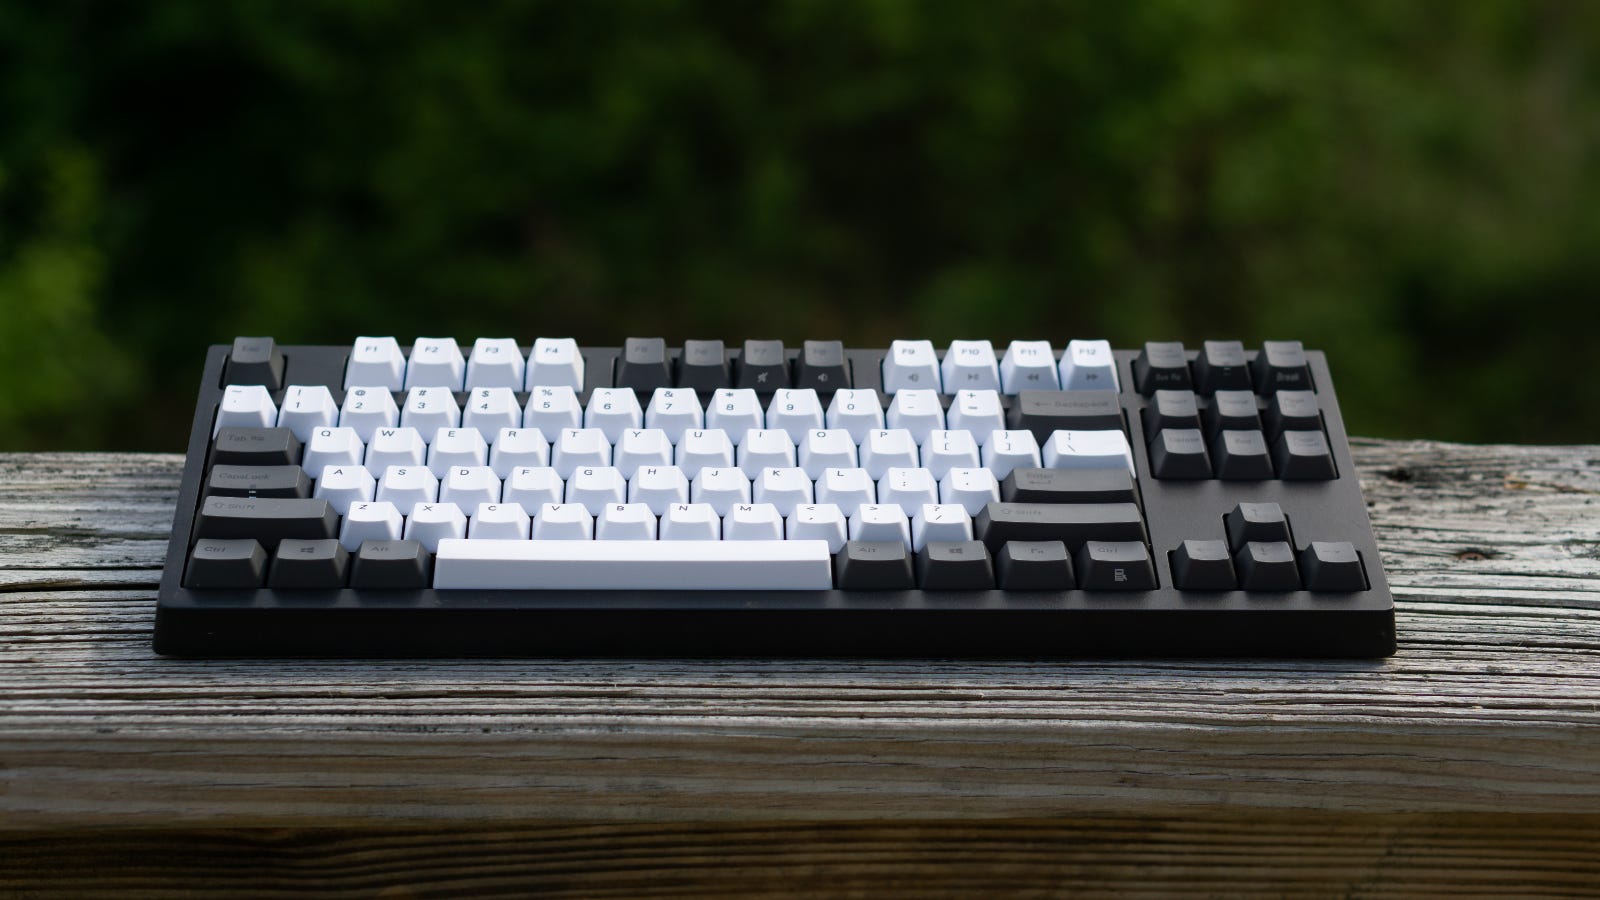 A black and white traditional mechanical keyboard